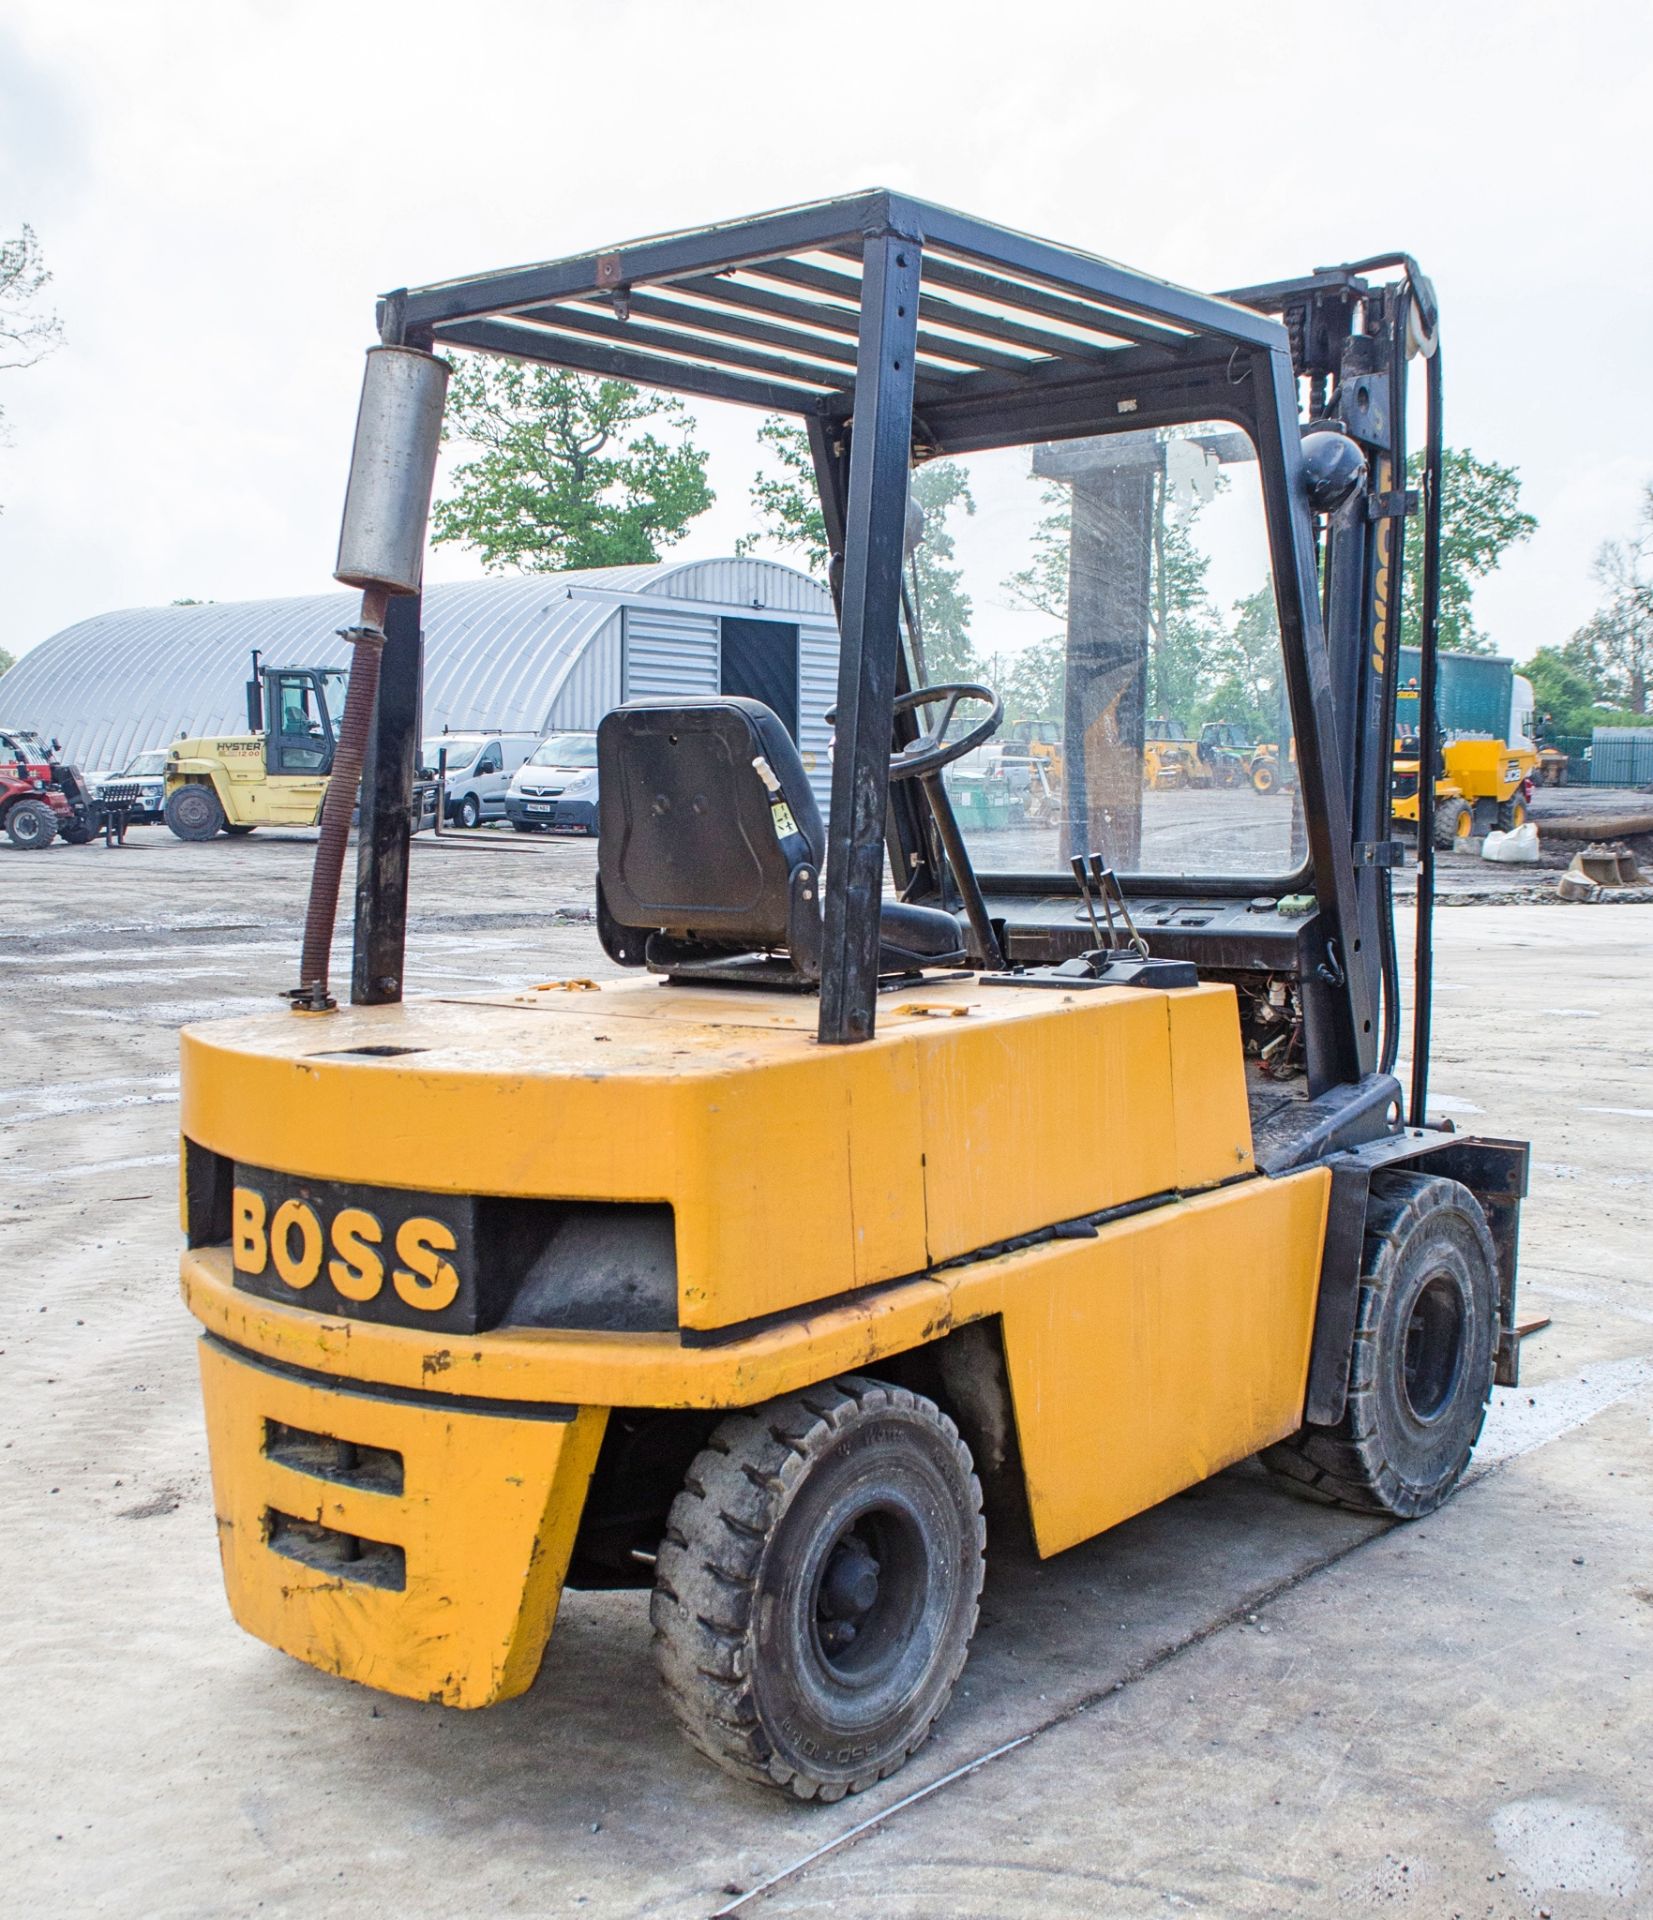 Boss RH30D 3 tonne diesel driven fork lift truck Year: Not stated on plate S/N: 01329 Recorded - Image 3 of 15